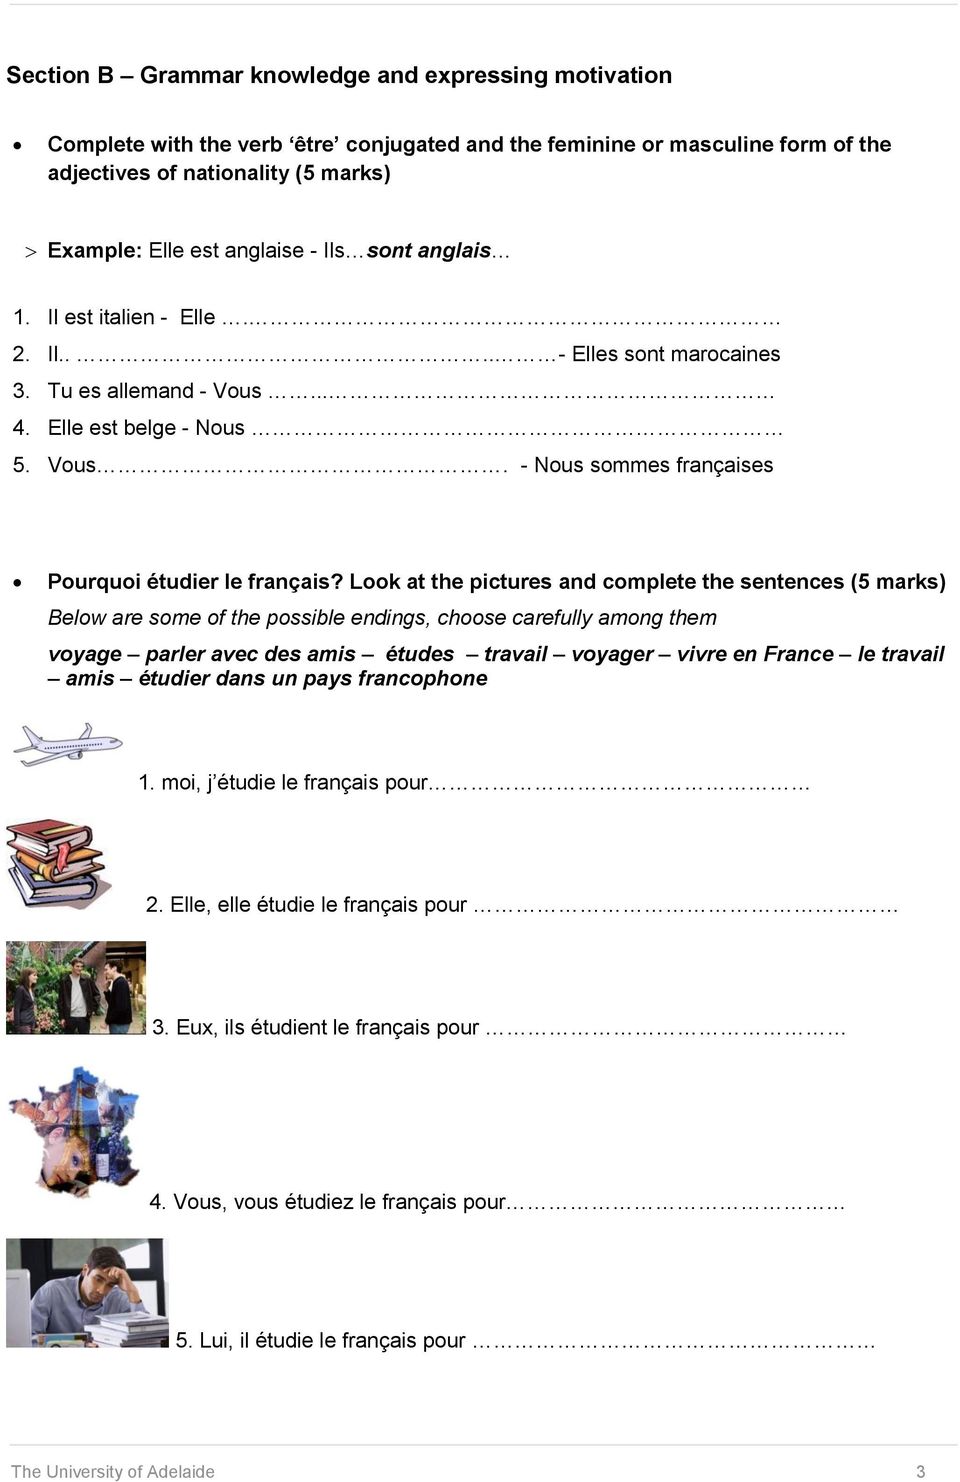 Look at the pictures and complete the sentences (5 marks) Below are some of the possible endings, choose carefully among them voyage parler avec des amis études travail voyager vivre en France le